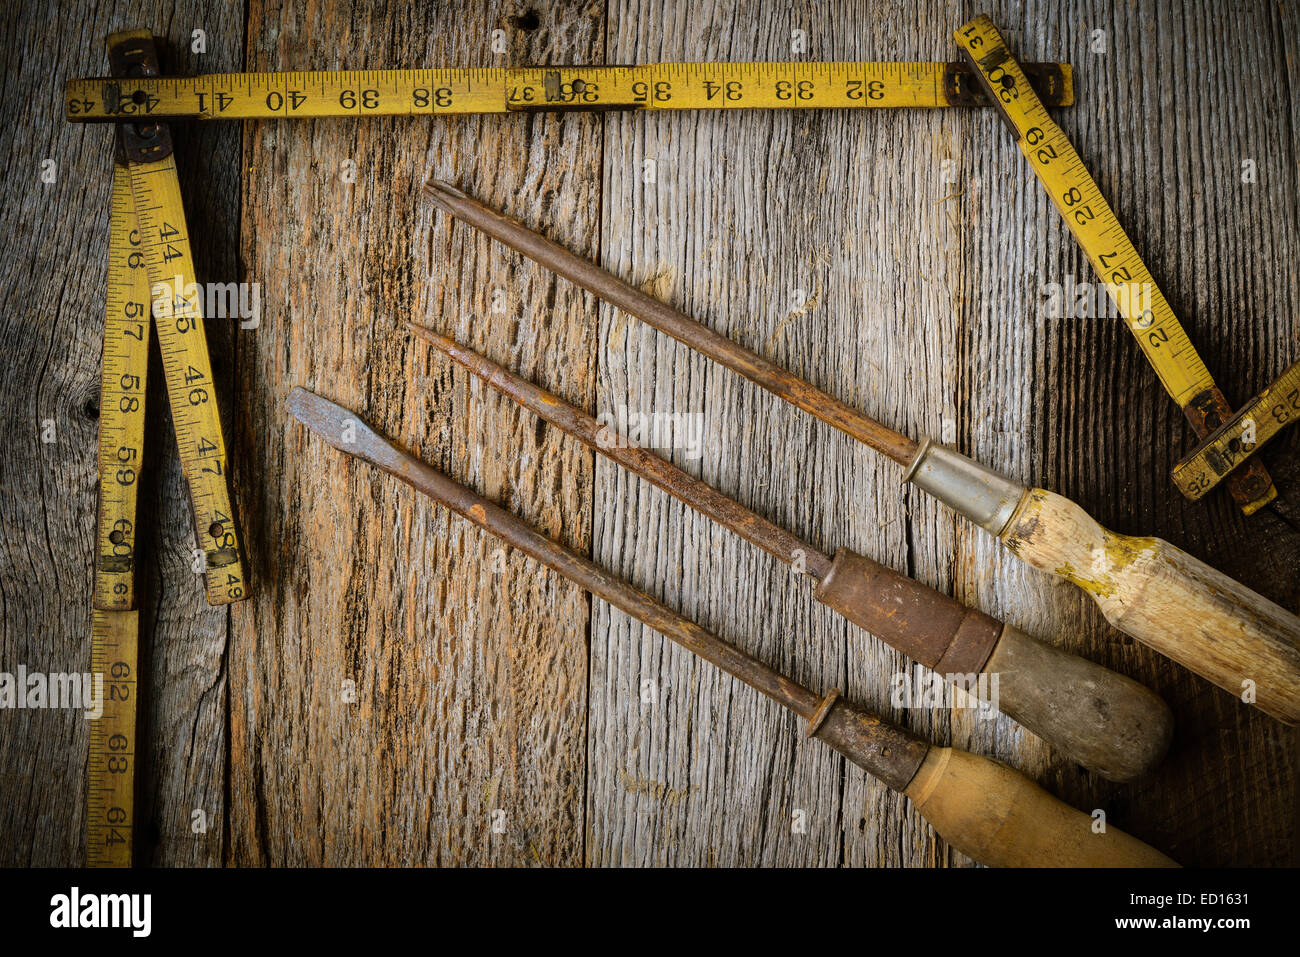 Measuring Tape and Screwdriver on Rustic Old Wood Background Stock Photo